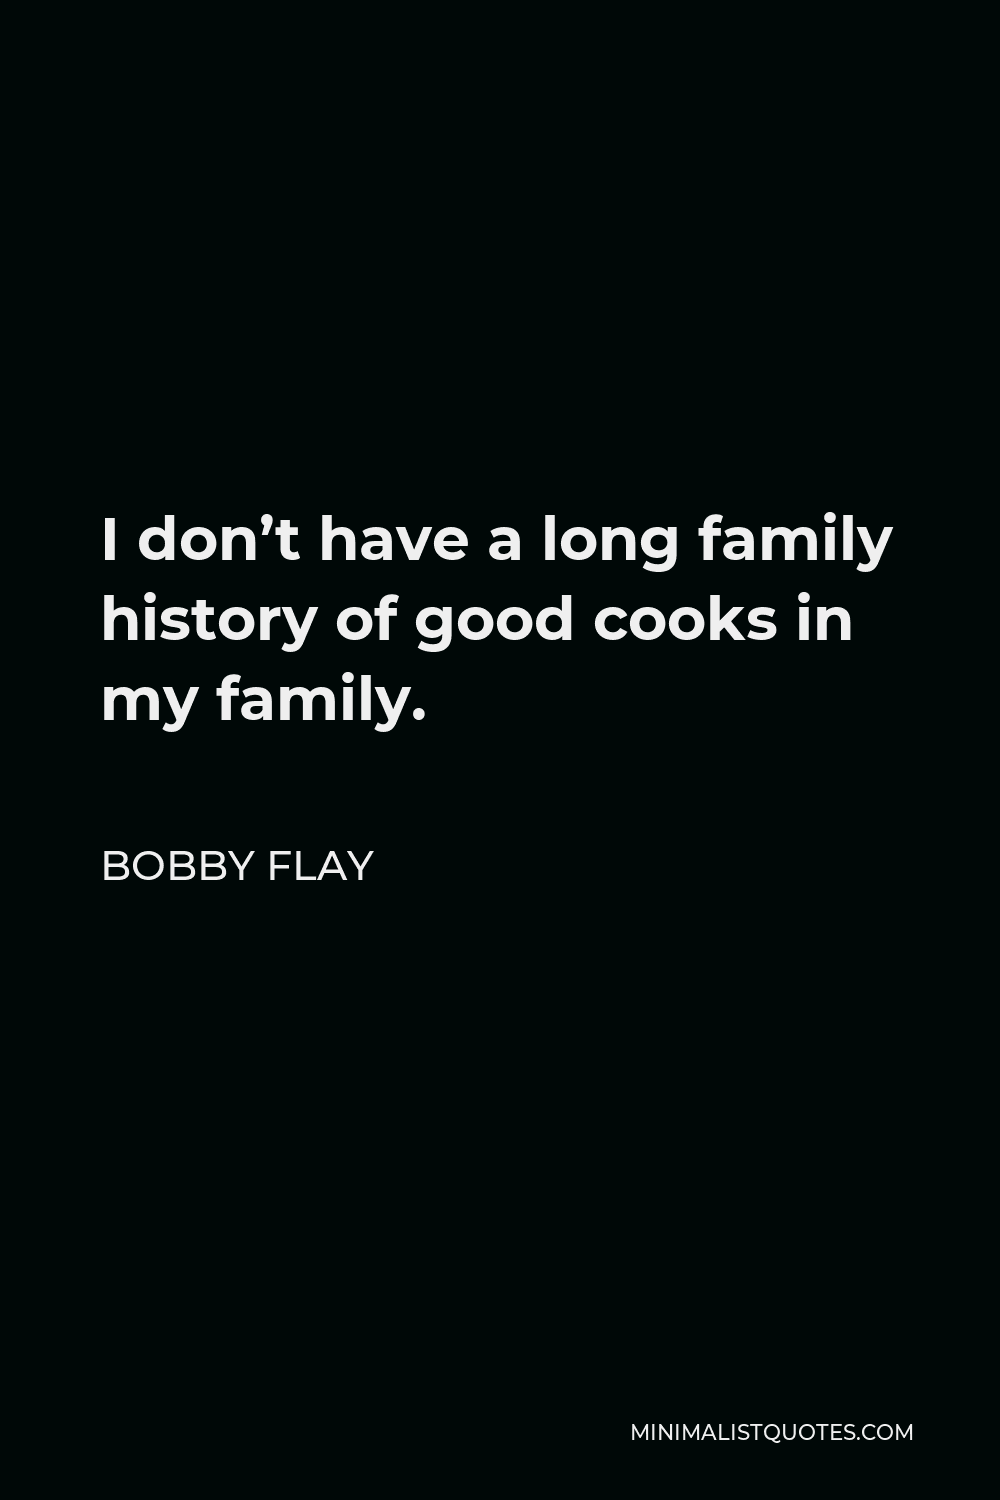 Bobby Flay Quote - I don’t have a long family history of good cooks in my family.